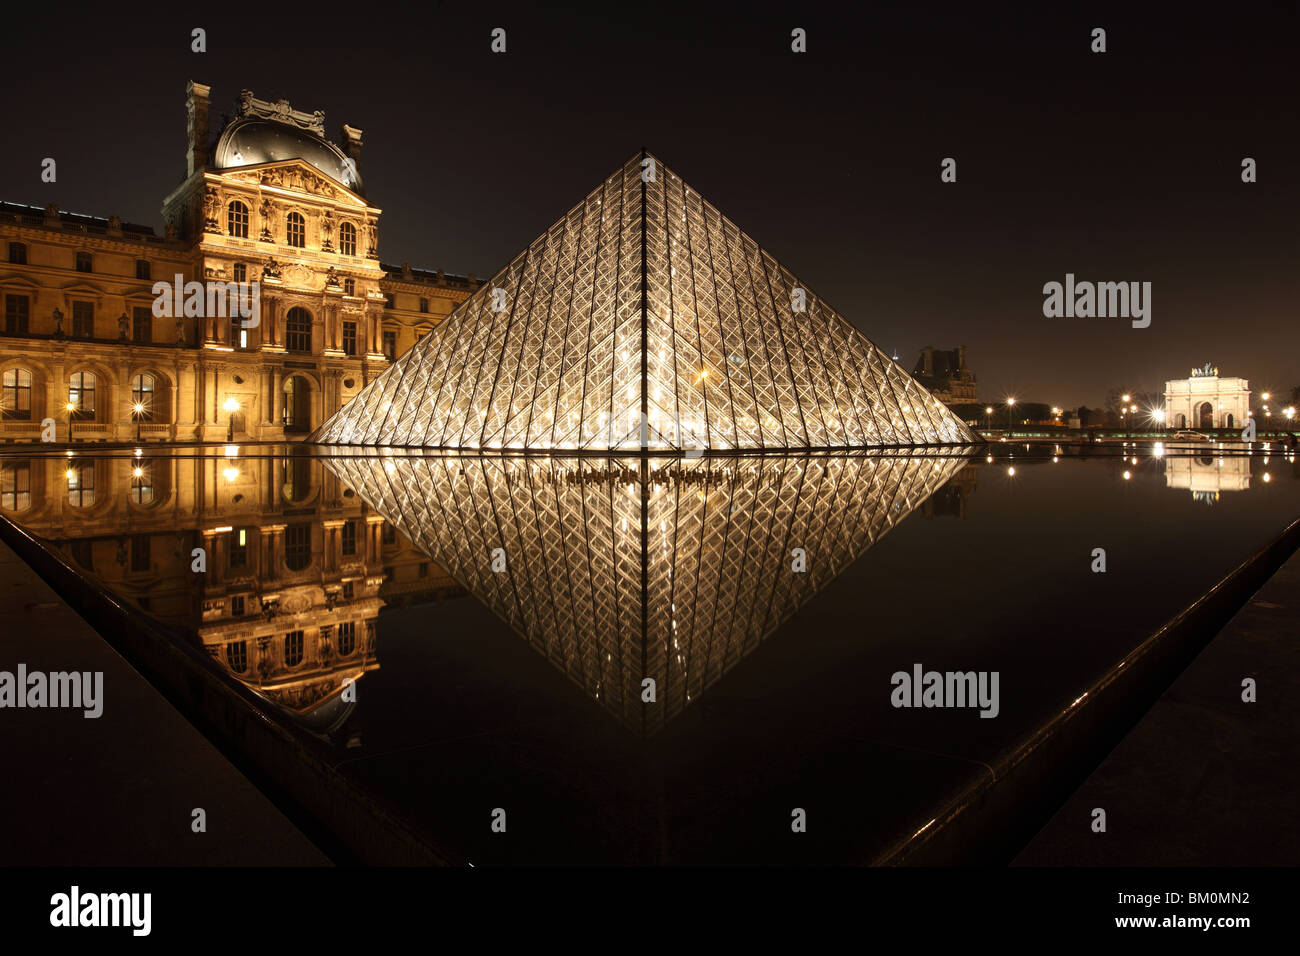 Louvre Pyramid in Paris France by I.M. Pei, photograph taken at night Stock Photo